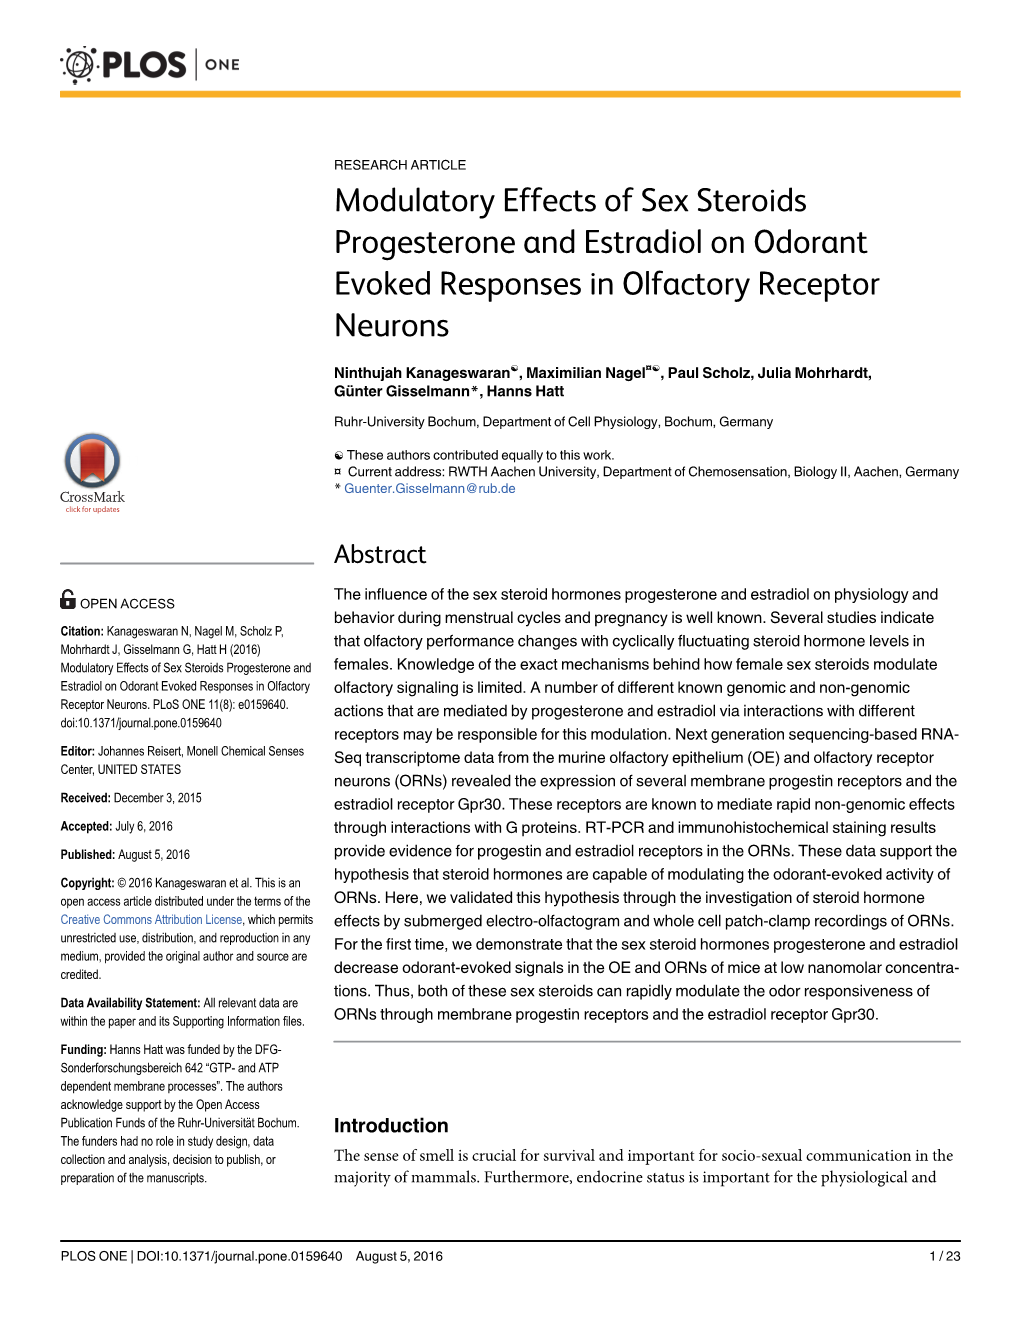 Modulatory Effects of Sex Steroids Progesterone and Estradiol on Odorant Evoked Responses in Olfactory Receptor Neurons